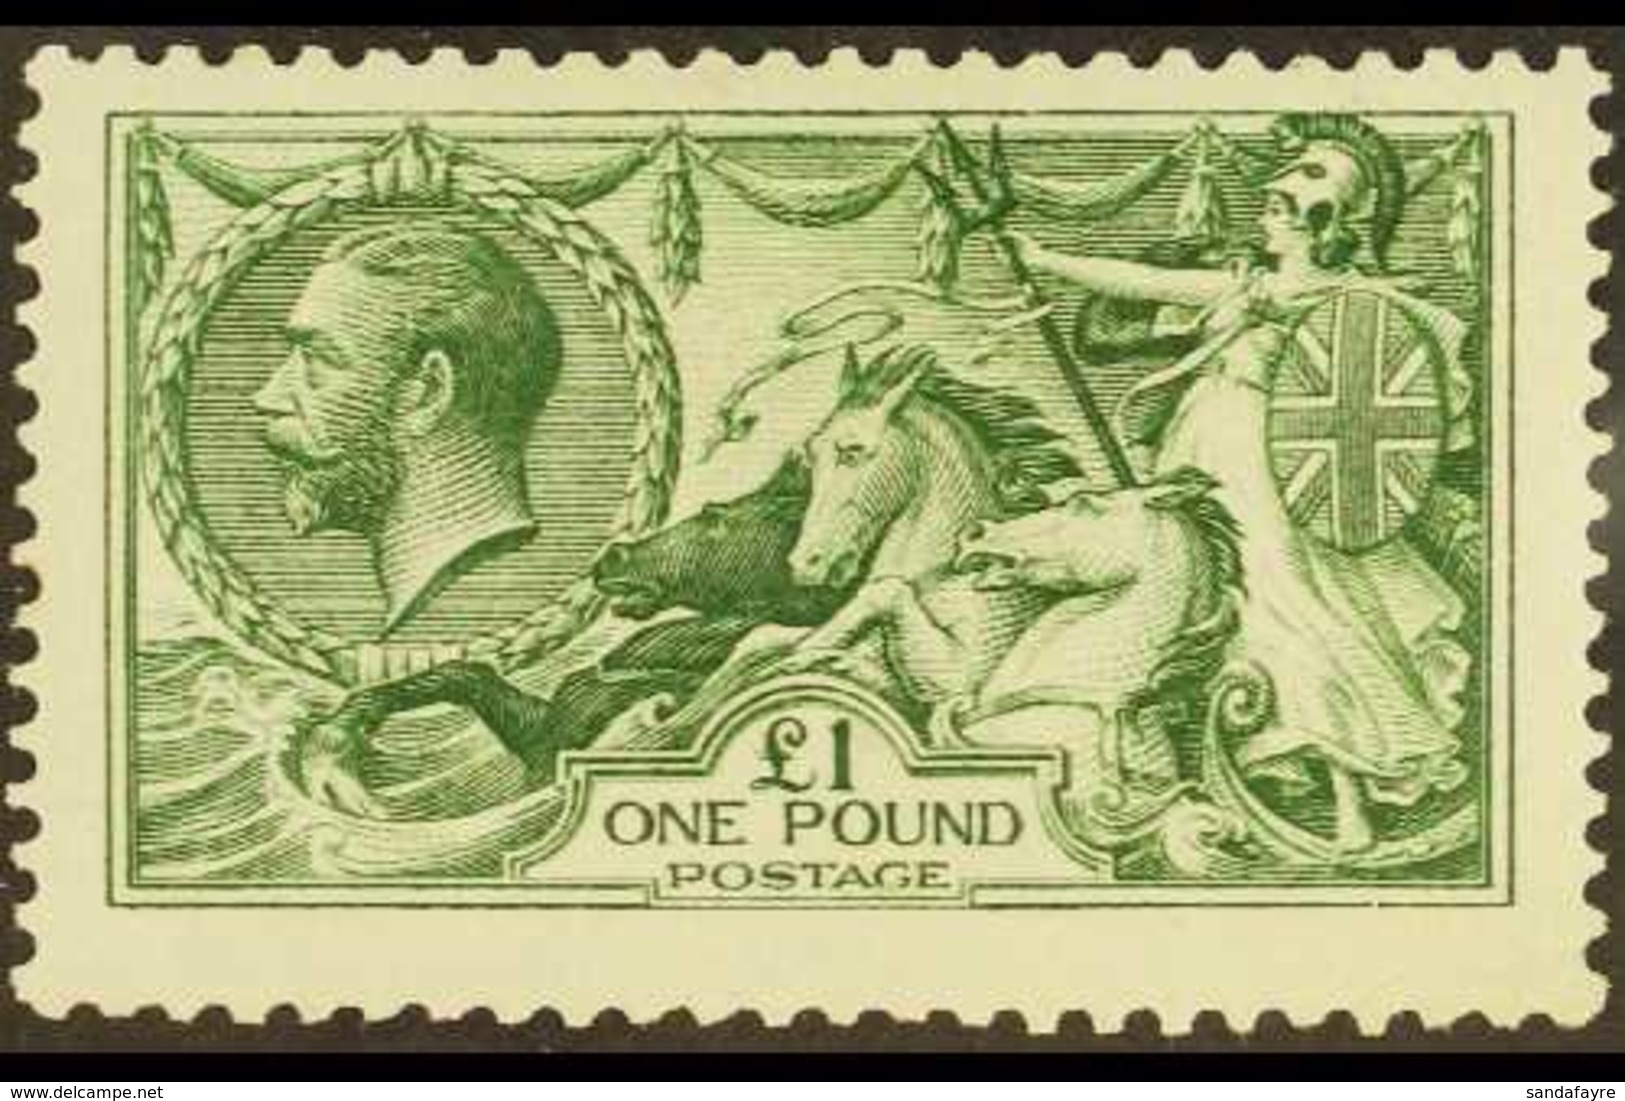 1913 £1 Deep Green Waterlow, SG Spec N72(2), Never Hinged Mint. A Stunning, Fresh Example Of This Rarer Shade, Cat £6500 - Non Classés